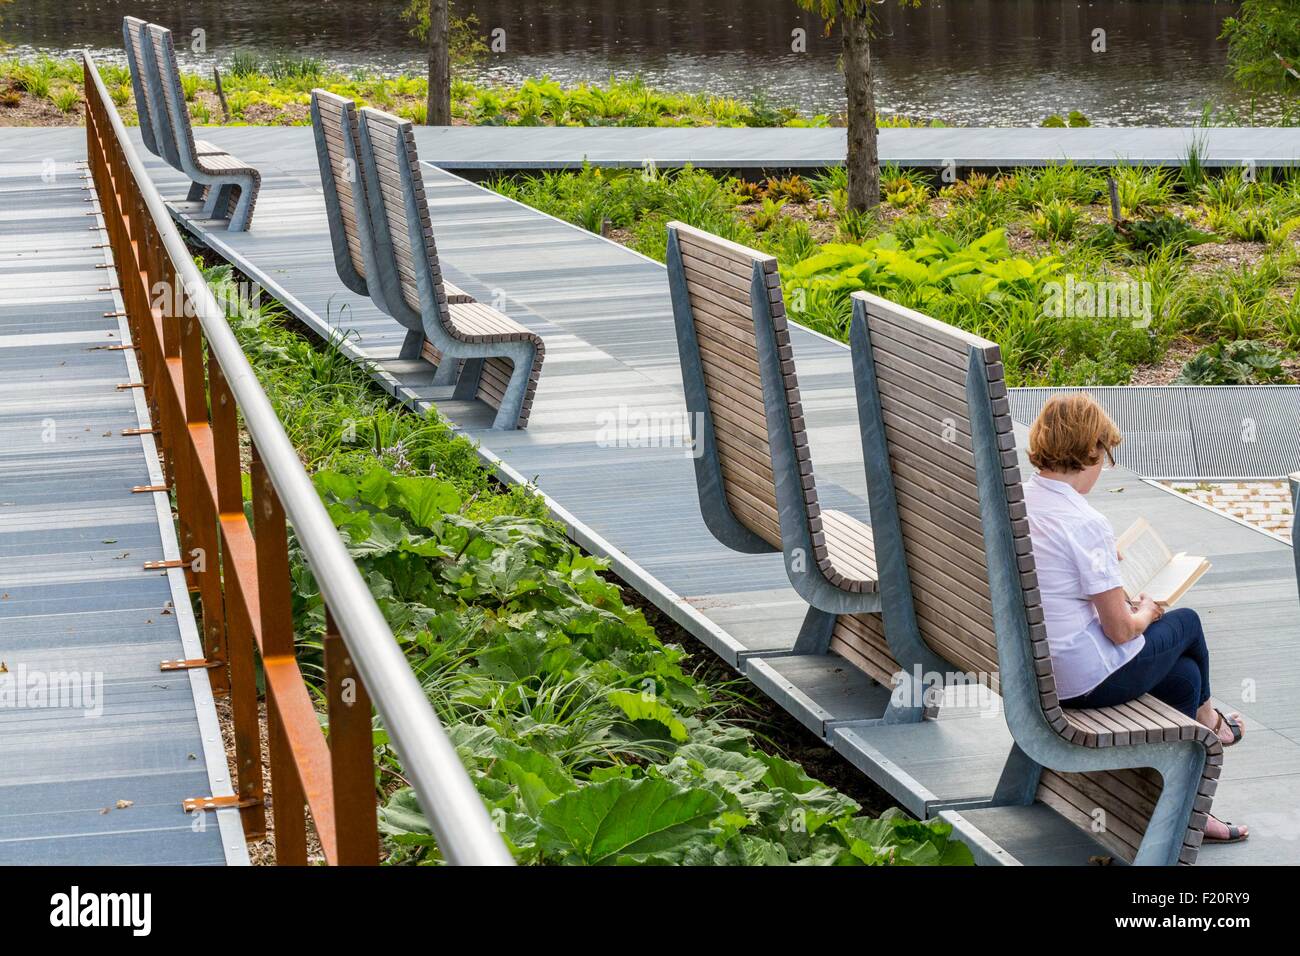 France, Ille et Vilaine, Rennes, garden Confluence opened in 2014 located on the banks of La Vilaine Stock Photo